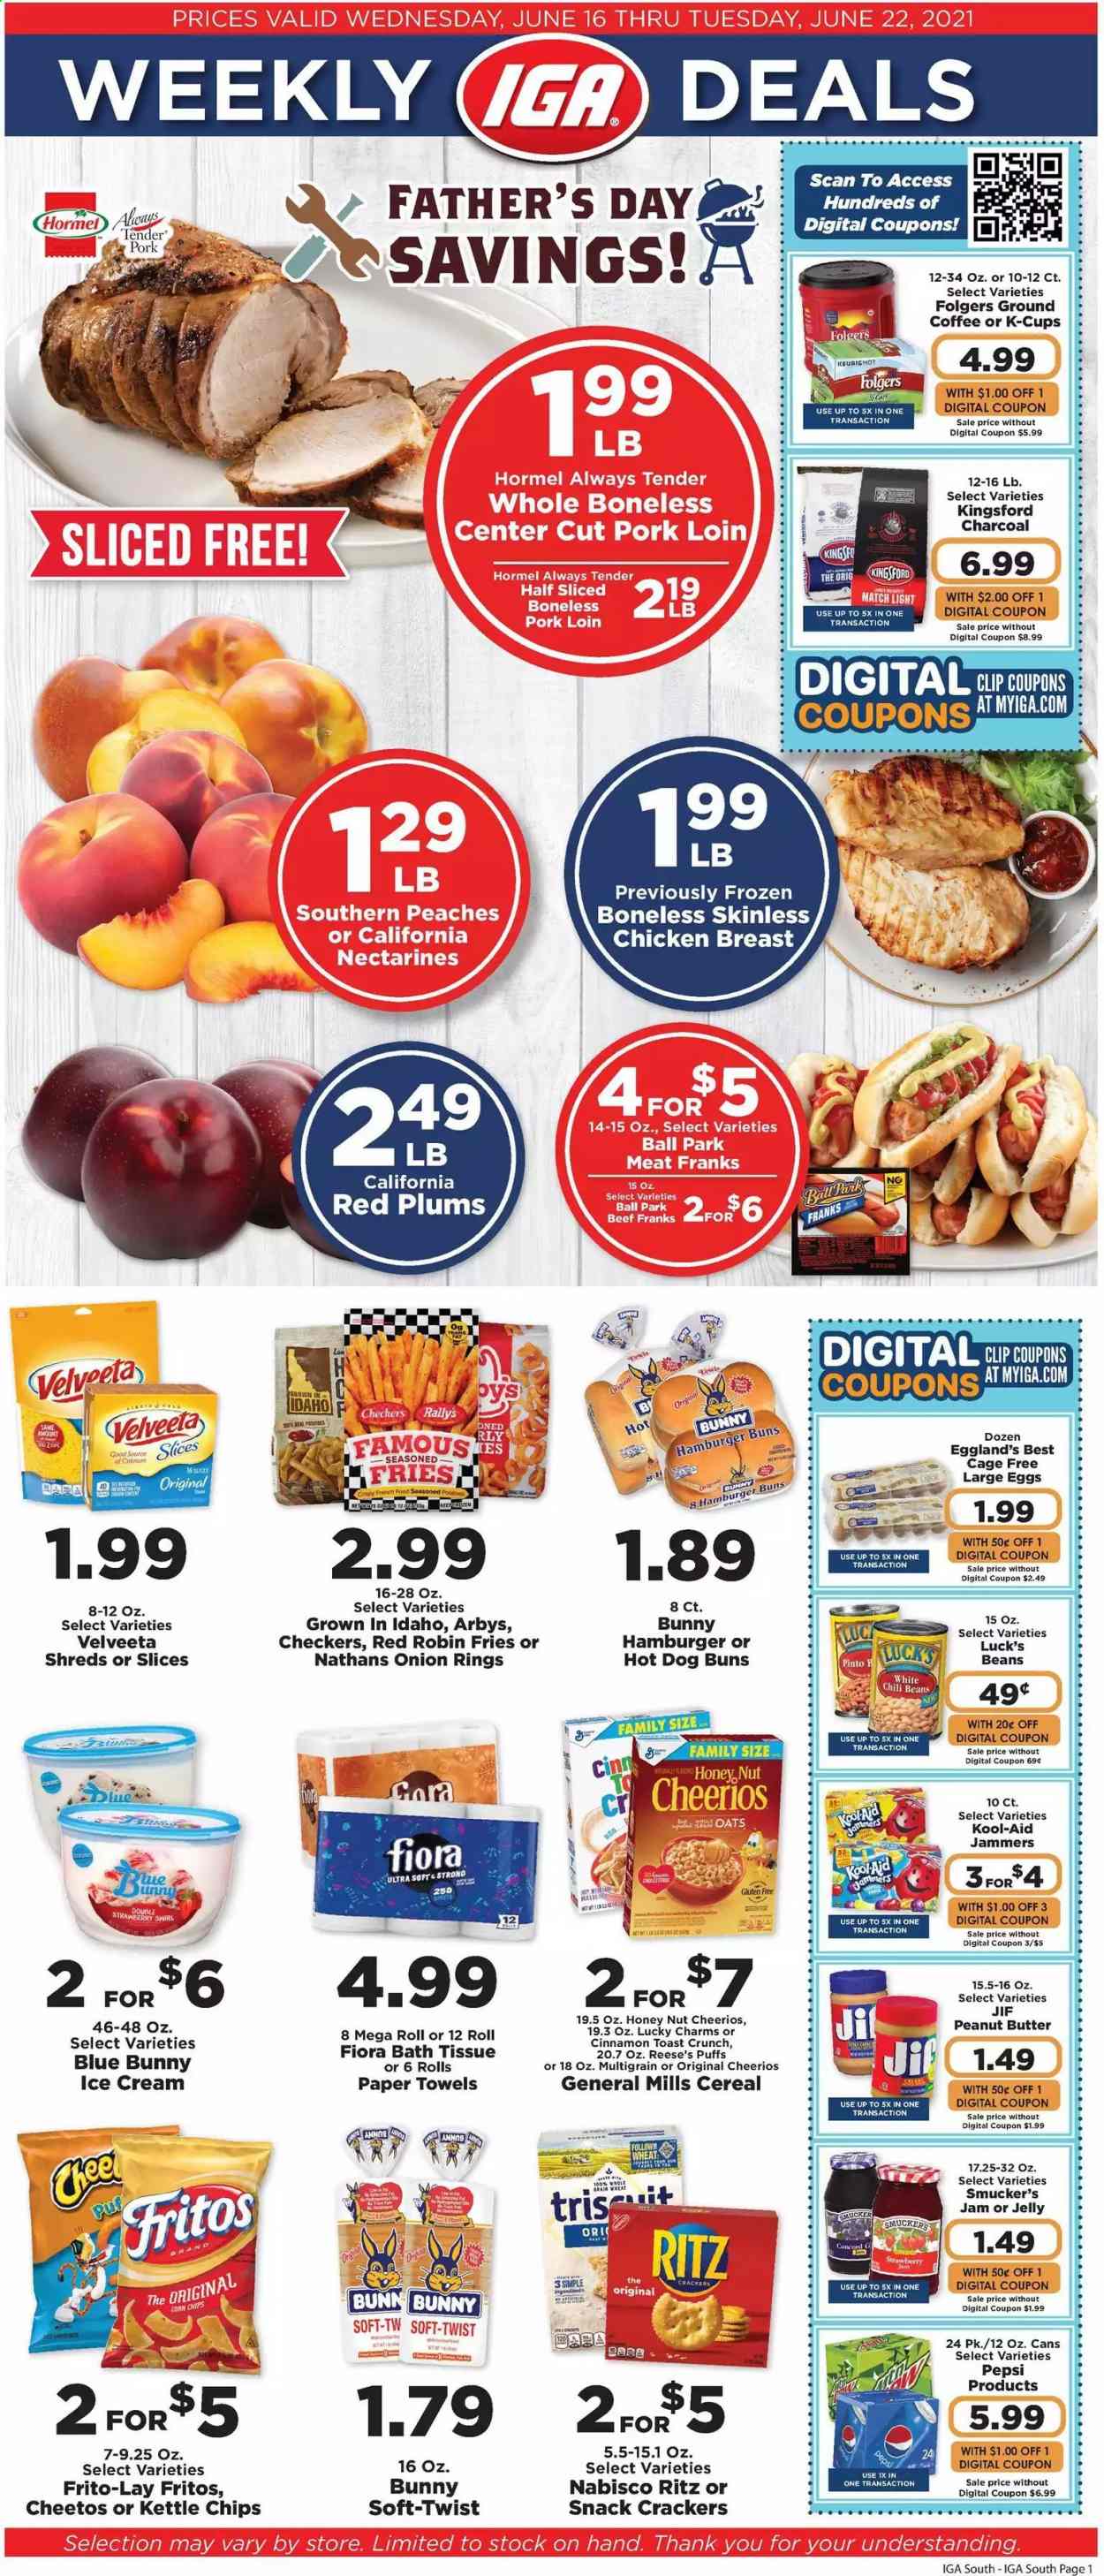 thumbnail - IGA Flyer - 06/16/2021 - 06/22/2021 - Sales products - plums, red plums, buns, burger buns, puffs, onion rings, Hormel, cage free eggs, large eggs, ice cream, Reese's, Blue Bunny, potato fries, jelly, crackers, RITZ, Fritos, Cheetos, Frito-Lay, oats, chili beans, cereals, Cheerios, cinnamon, fruit jam, peanut butter, Jif, Pepsi, coffee, Folgers, ground coffee, K-Cups, chicken breasts, pork loin, pork meat, bath tissue, kitchen towels, paper towels, nectarines, peaches. Page 1.